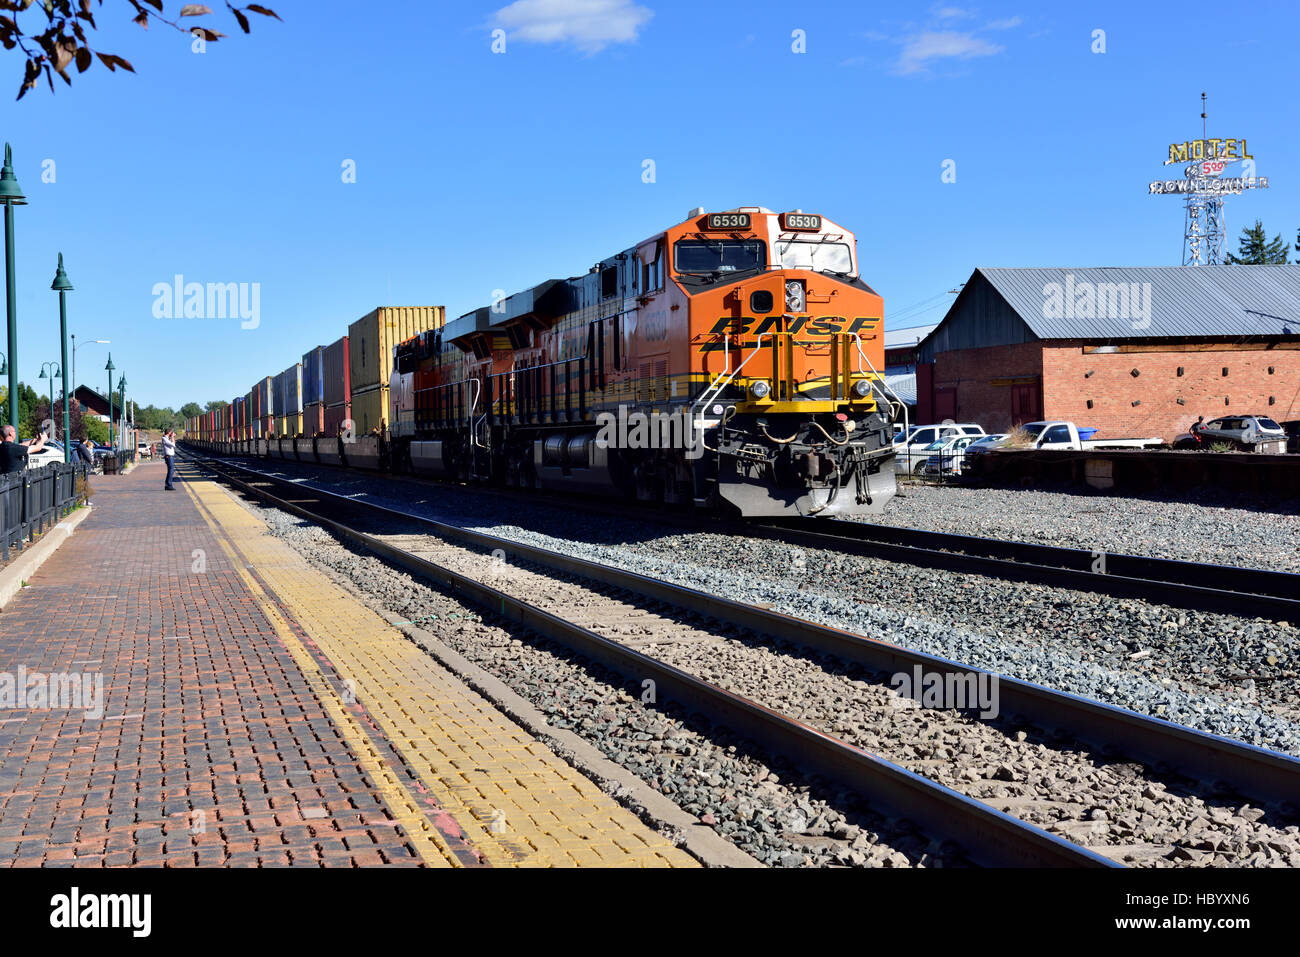 BNSF diesel locomotive pulling long train of shipping containers at Flagstaff, Arizona Stock Photo